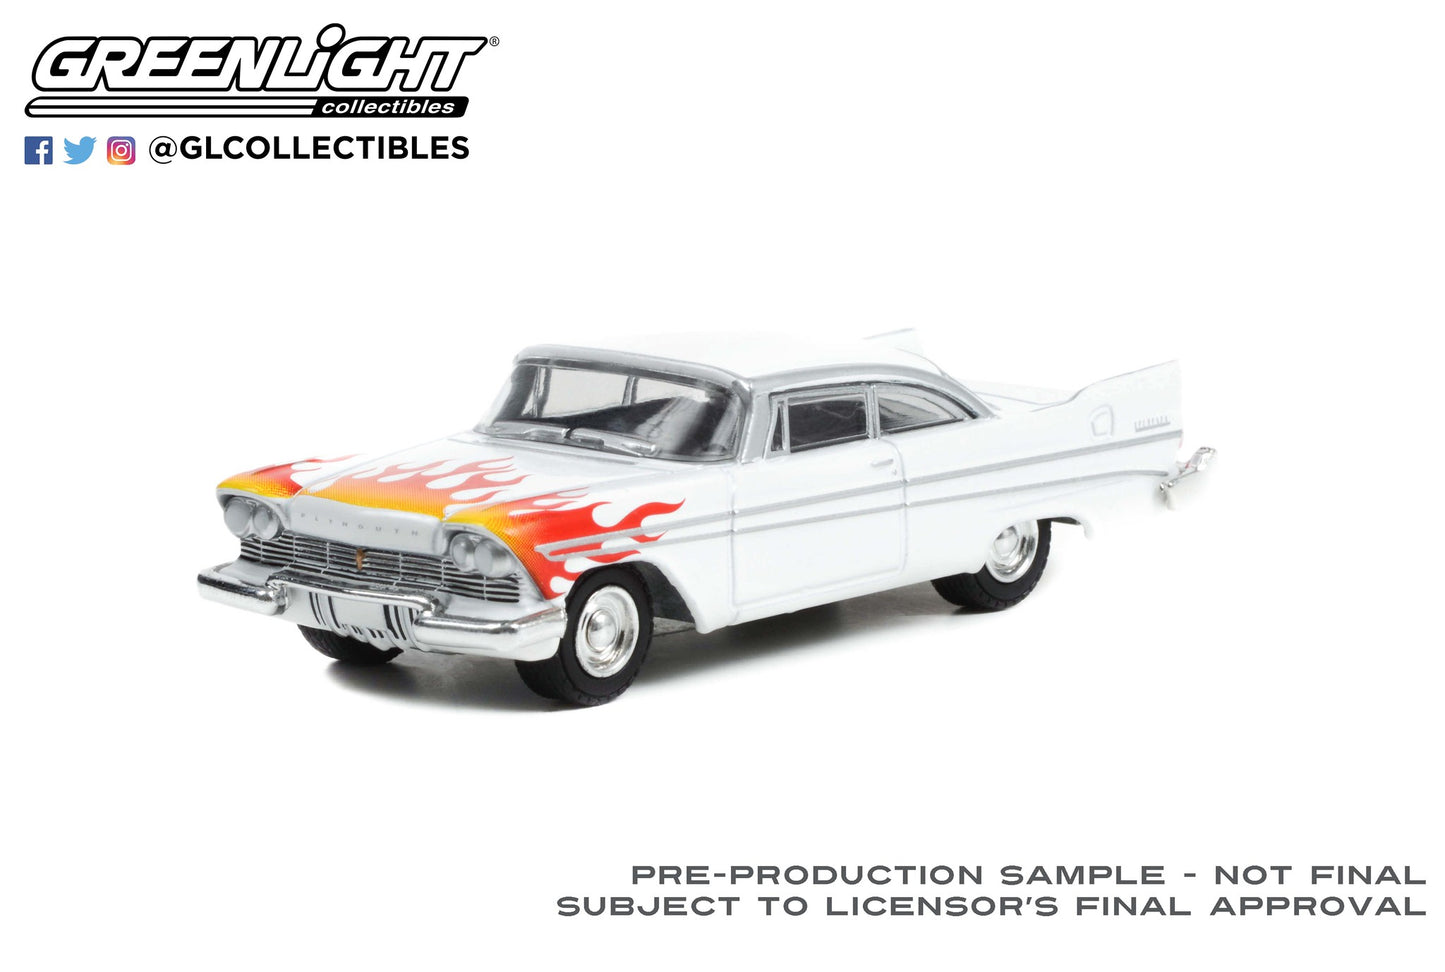 GreenLight 1:64 Flames The Series - 1957 Plymouth Belvedere - White with Flames (Hobby Exclusive) 30362